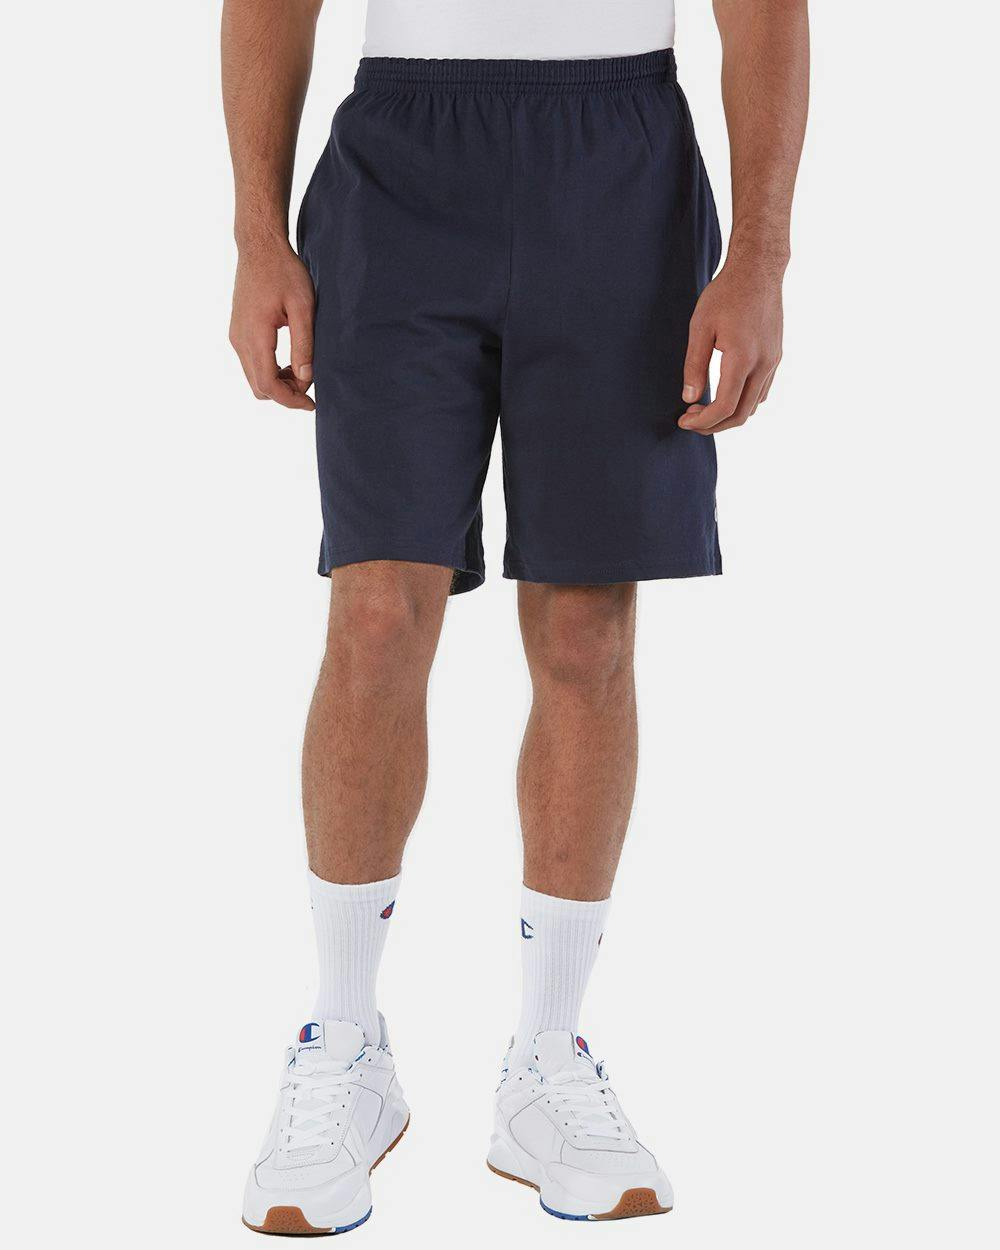 Image for Cotton Jersey 9" Shorts with Pockets - 8180